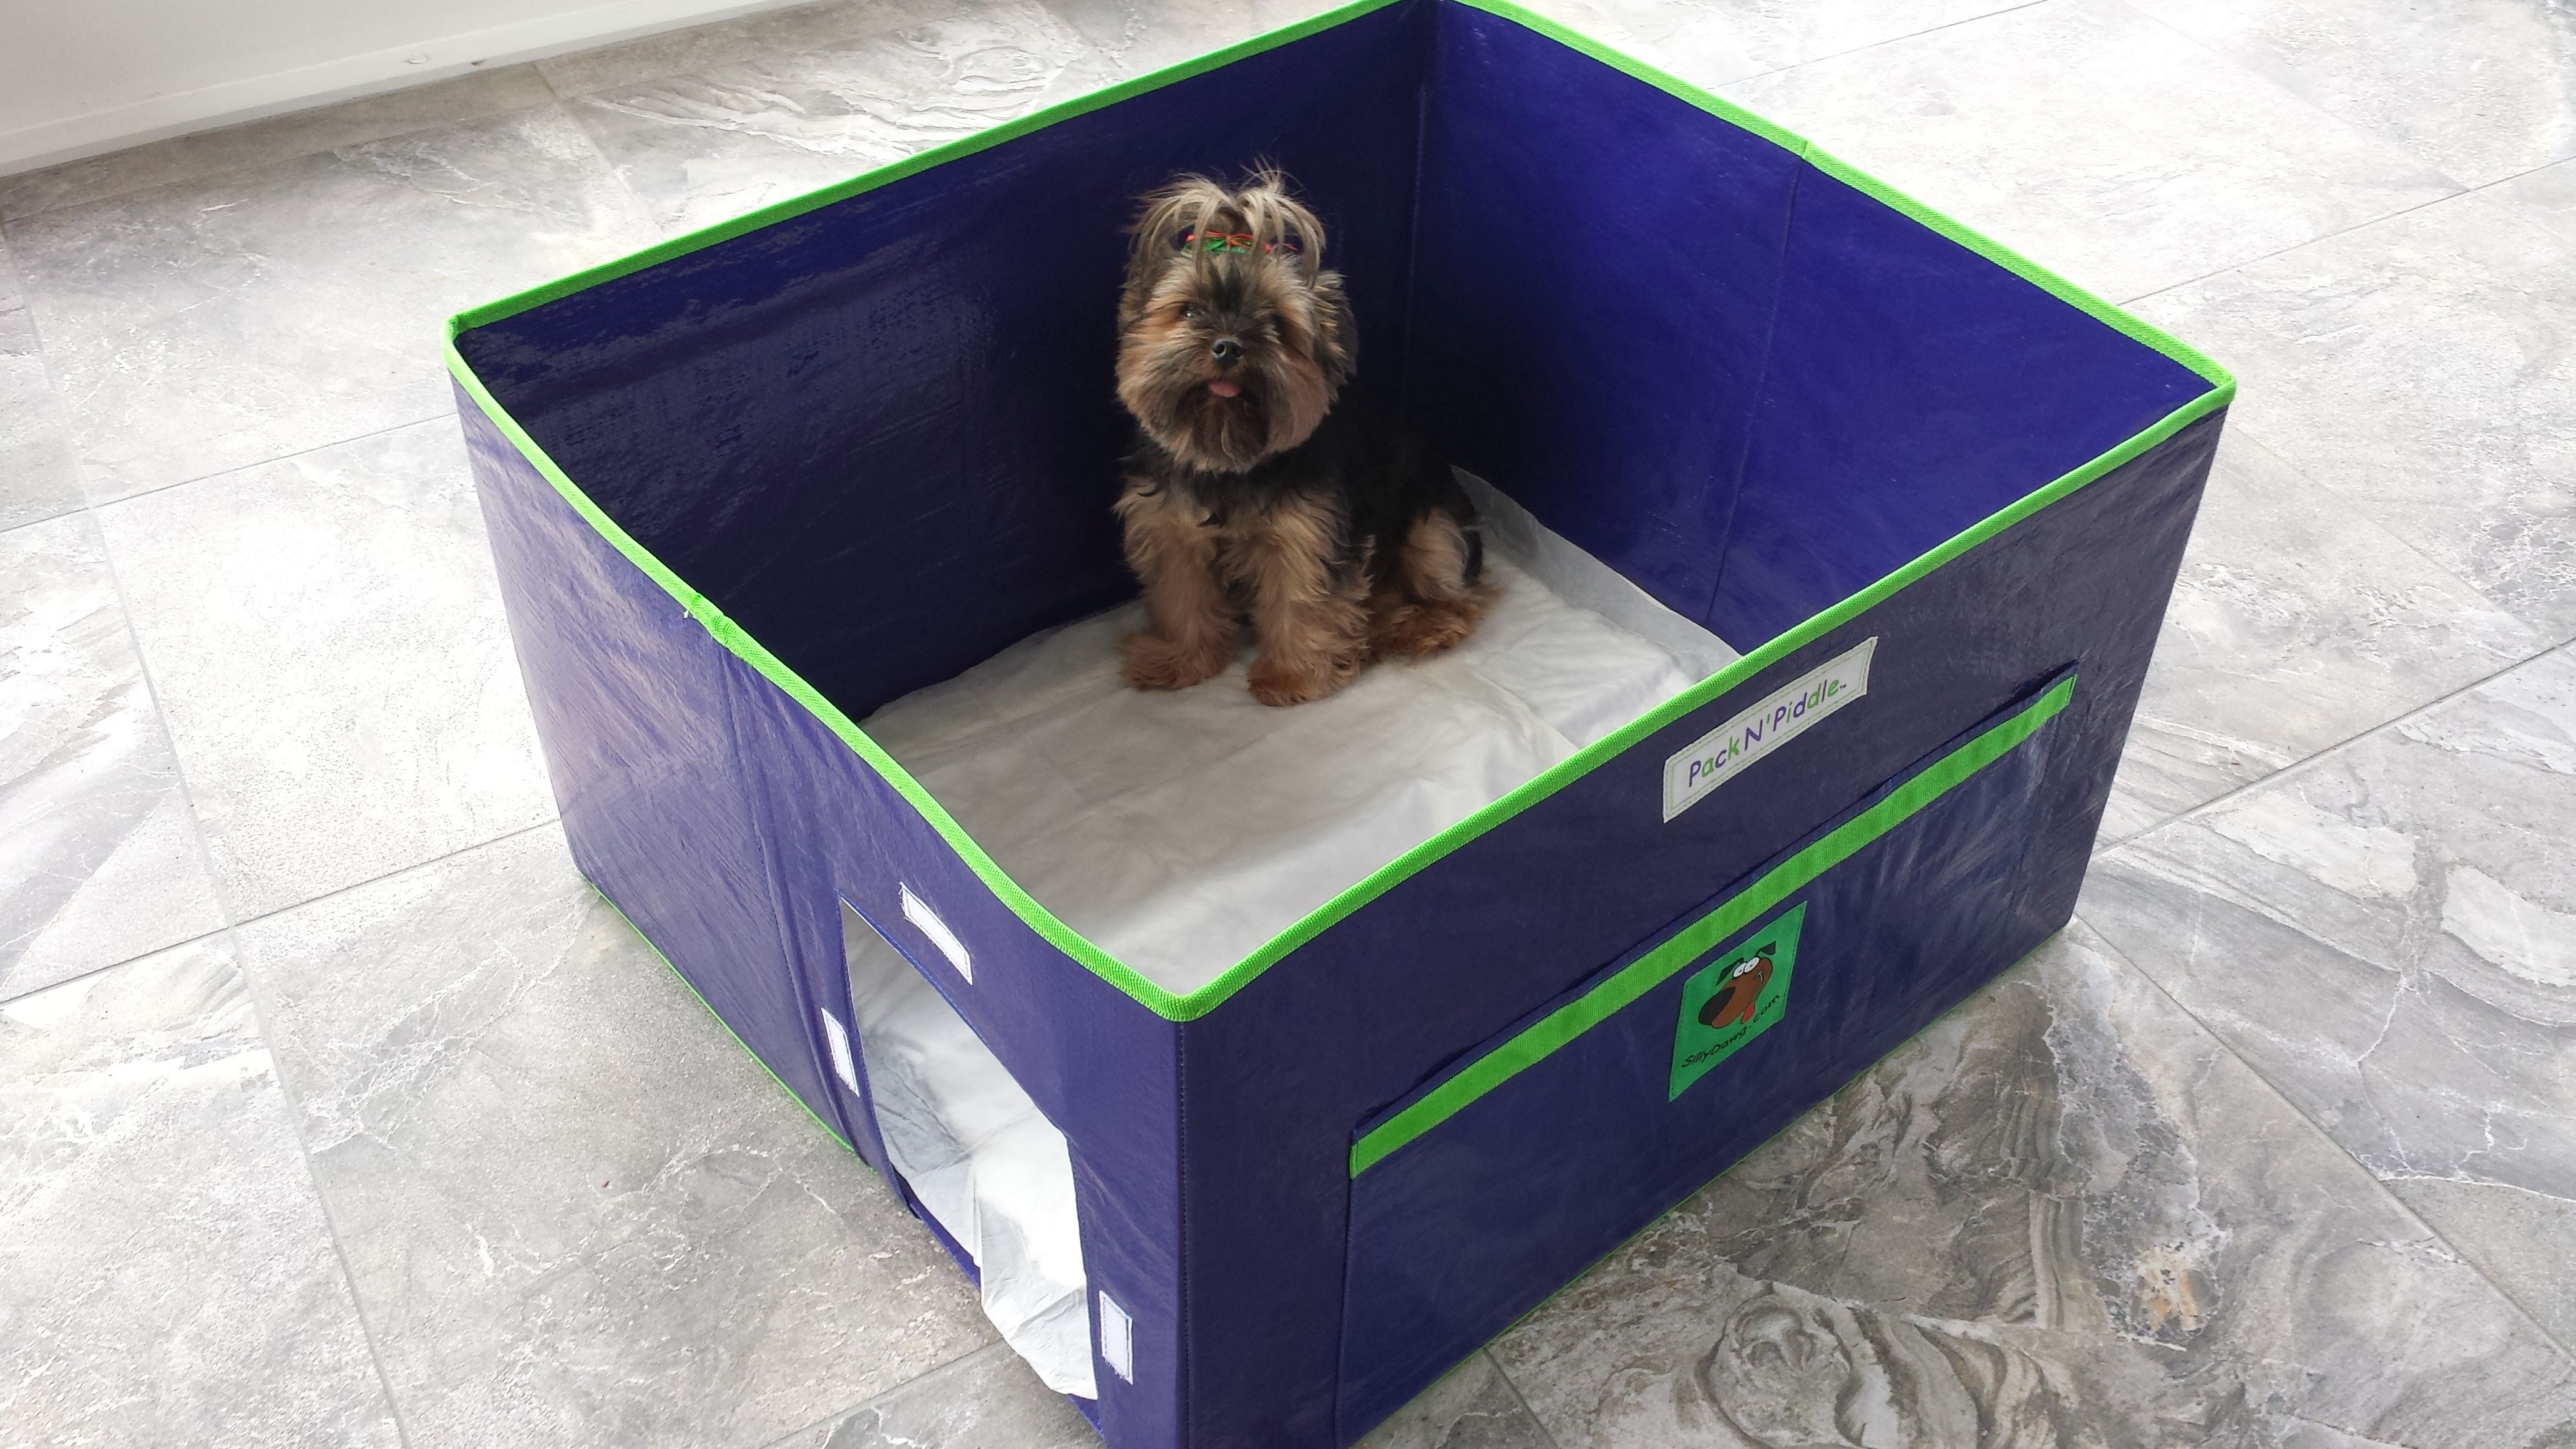 Litter Boxes Aren't Just For Cats Anymore! Check out the Pack ‘N Piddle.